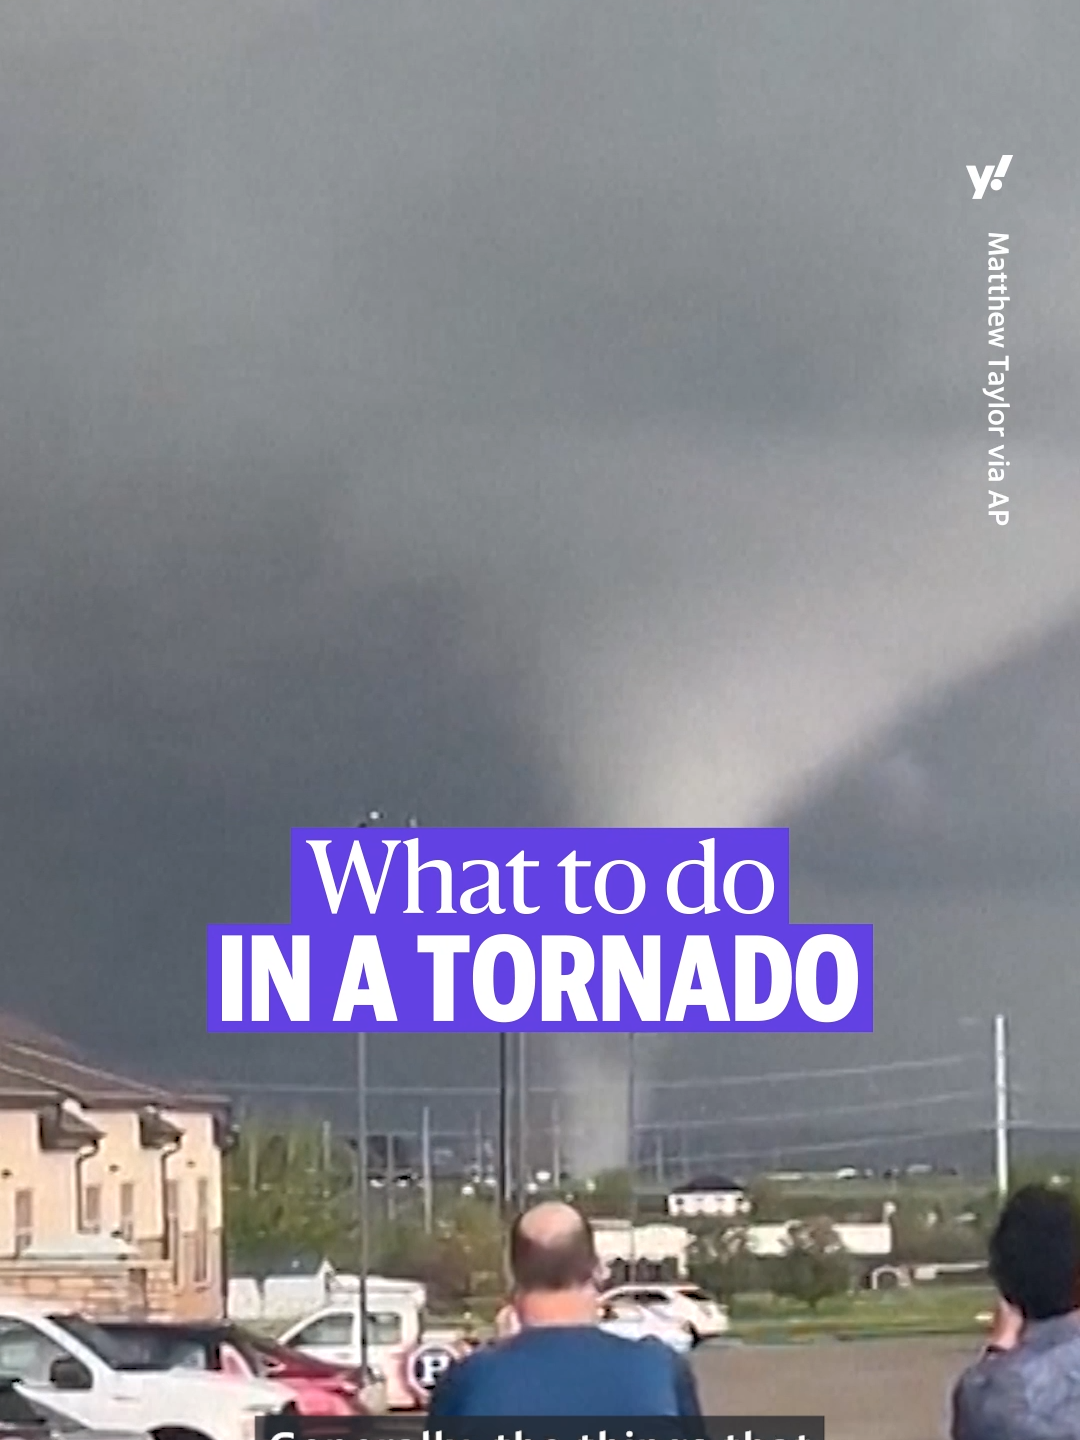 Tornadoes are one of nature’s most destructive forces, second only to hurricanes. Here are some tips to stay safe this storm season. #news #tornado #safetytips #weather #yahoonews